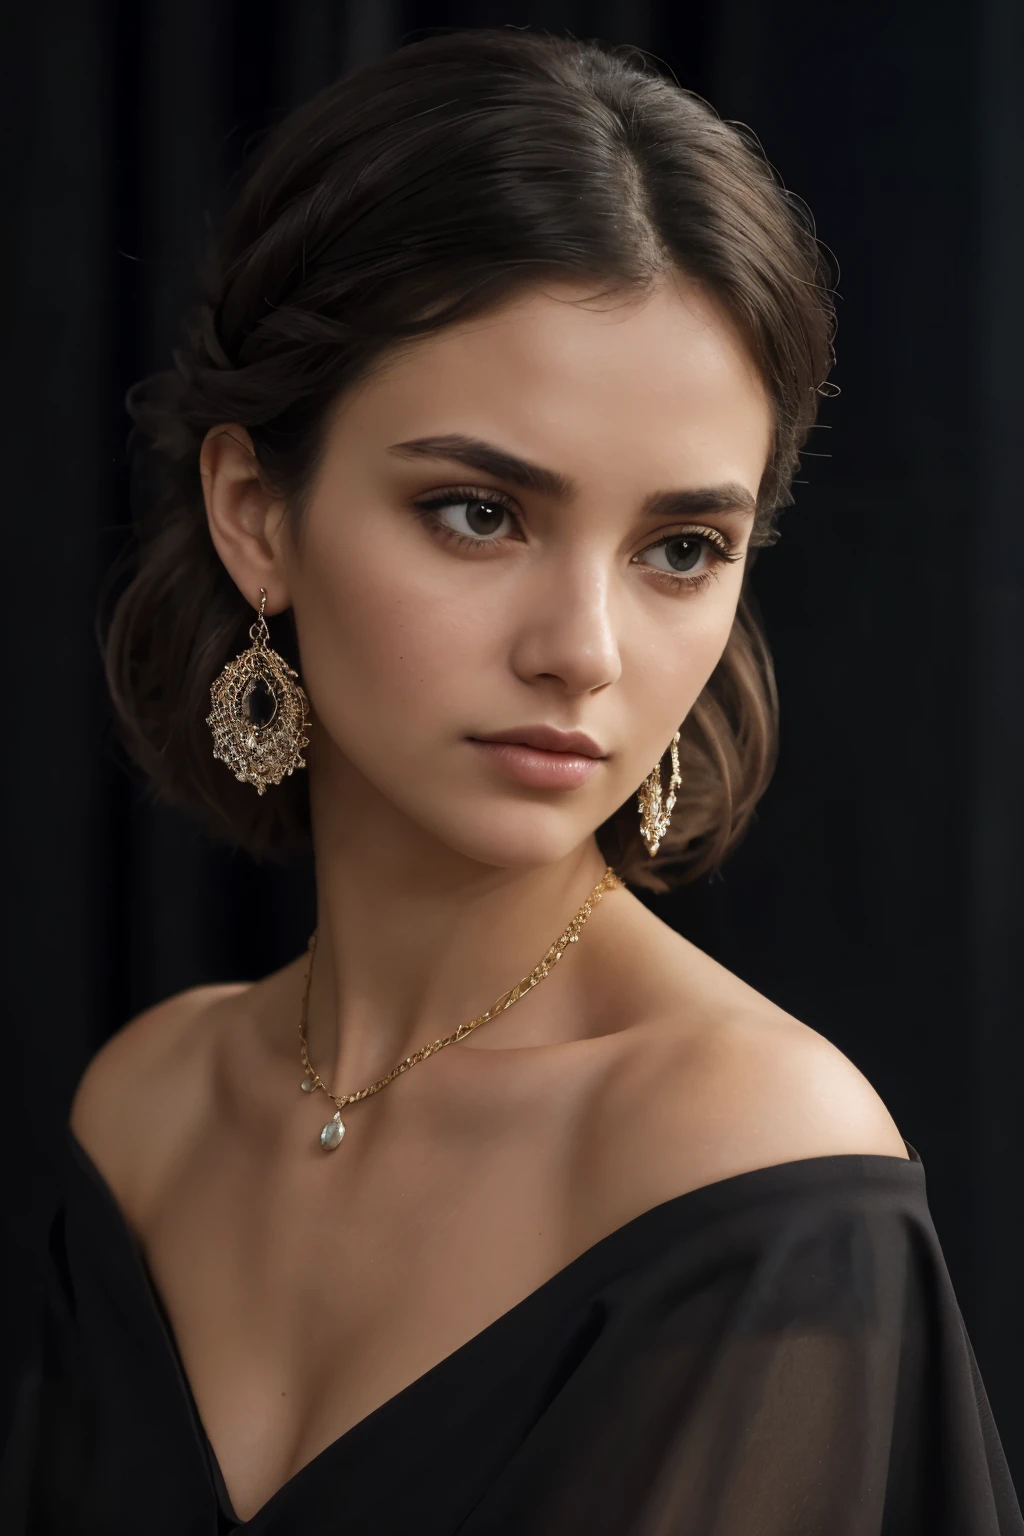 A close-up shot of a woman with a pensive expression, wearing a dark, off-the-shoulder dress and a single, statement piece of jewelry, The background should be out of focus and feature soft, warm tone